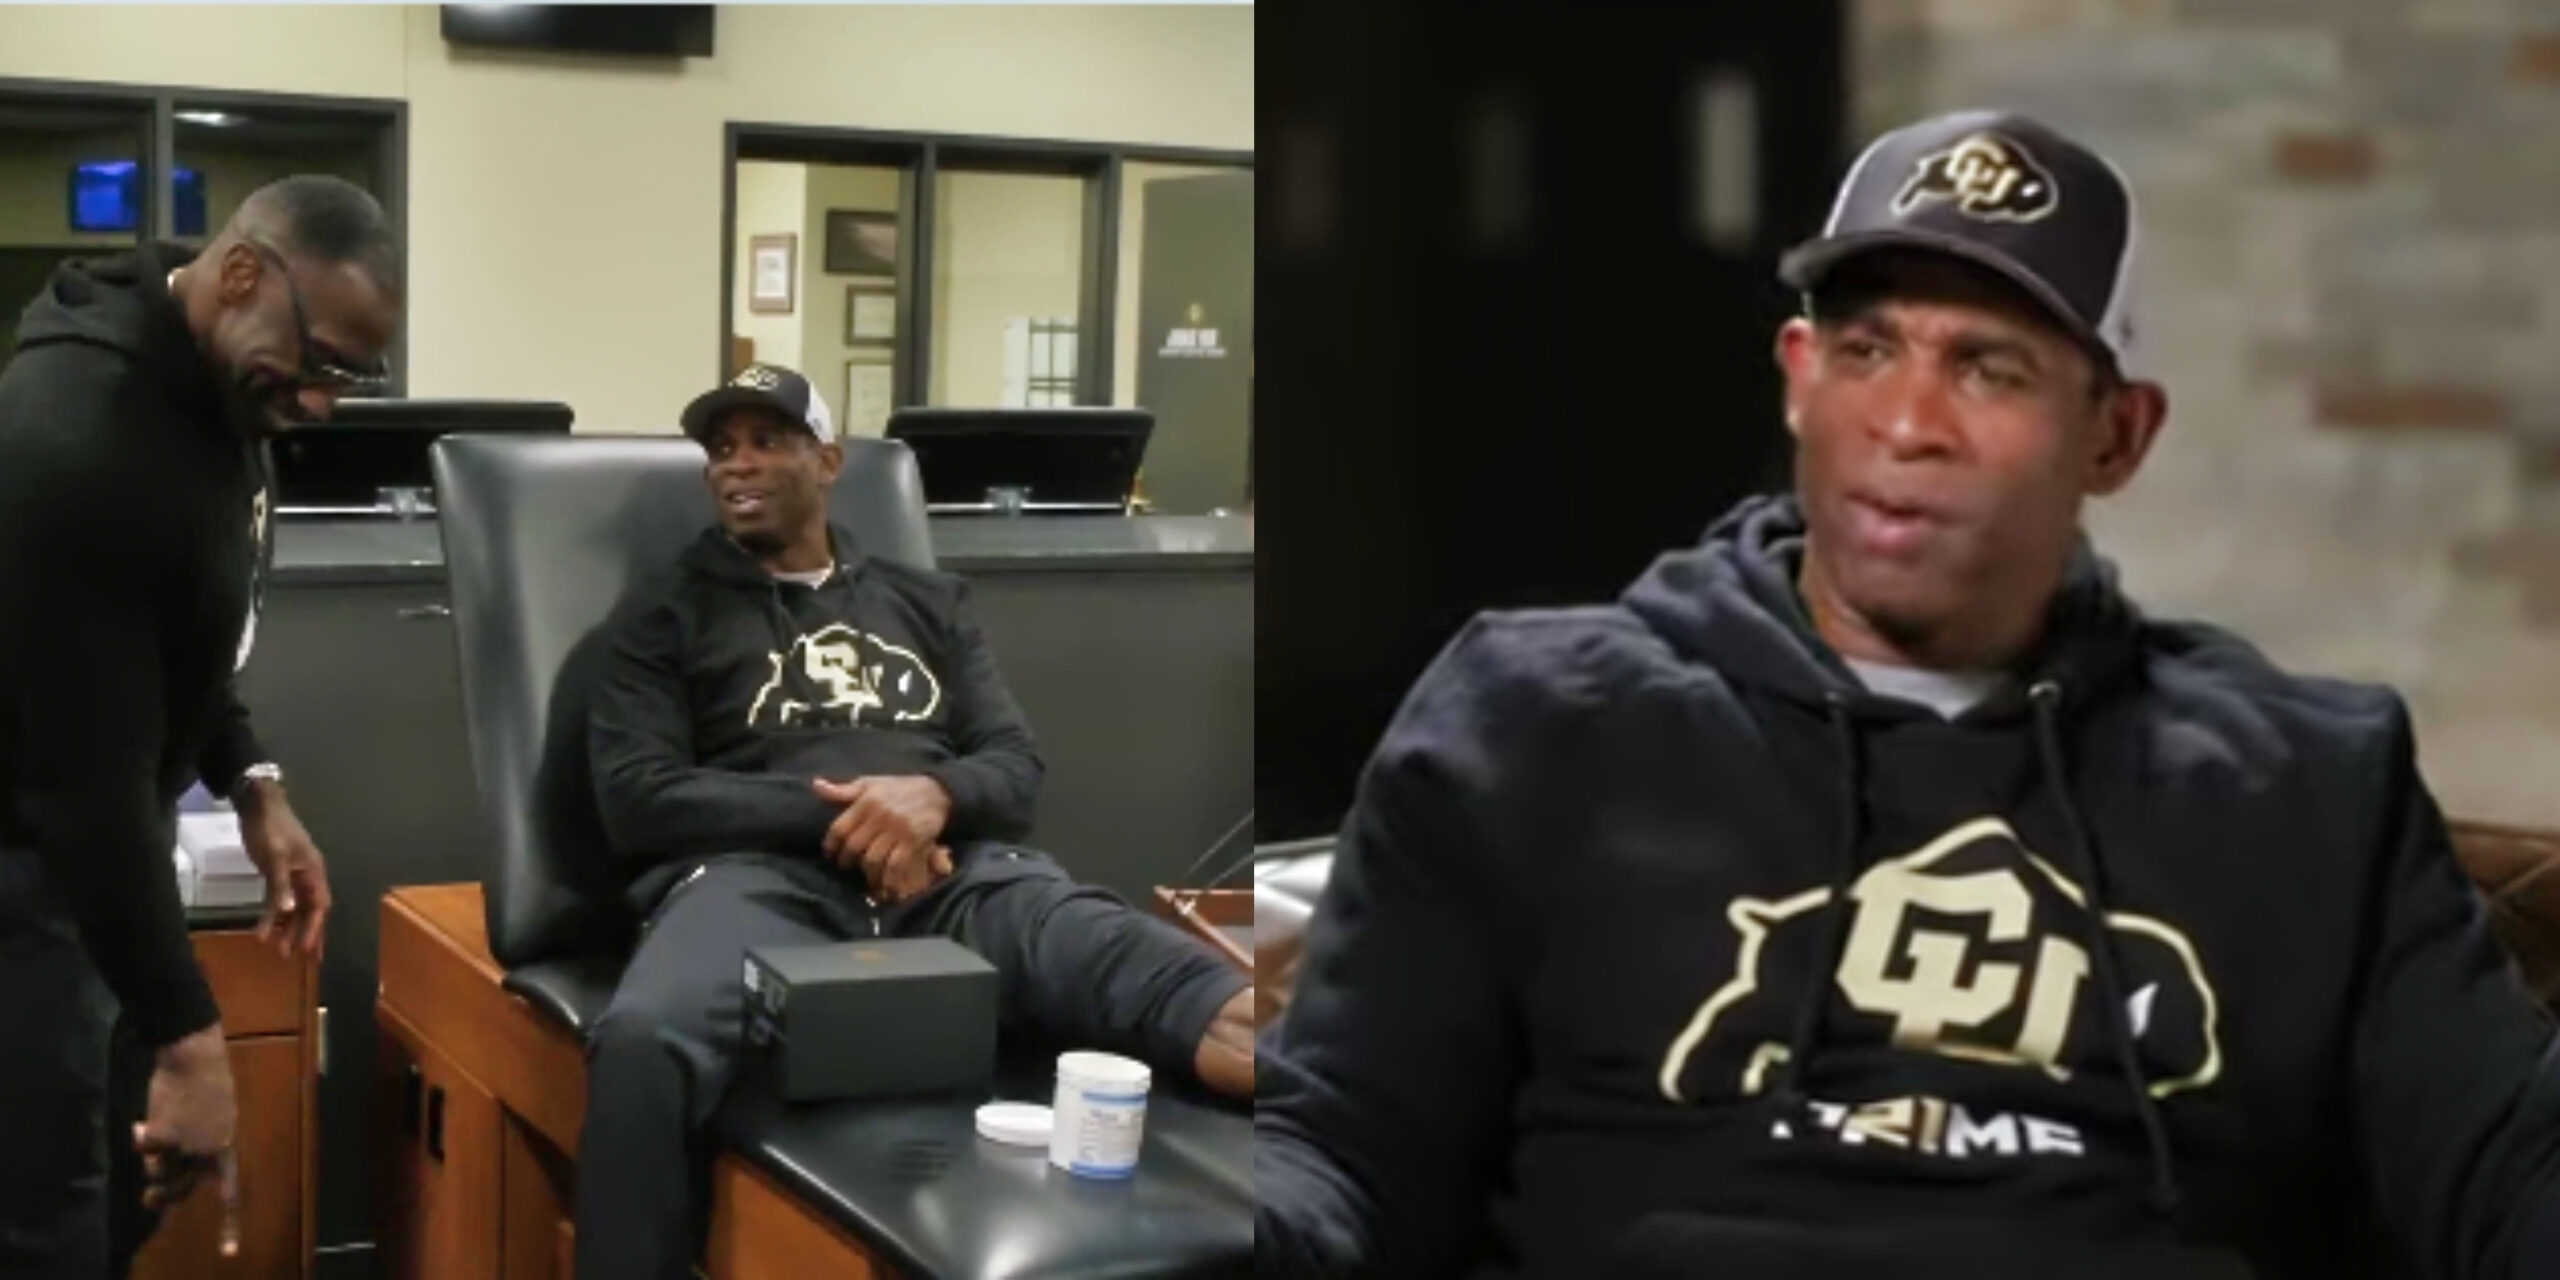 Social Media Reacts To Video Of Deion Sanders Amputated Foot